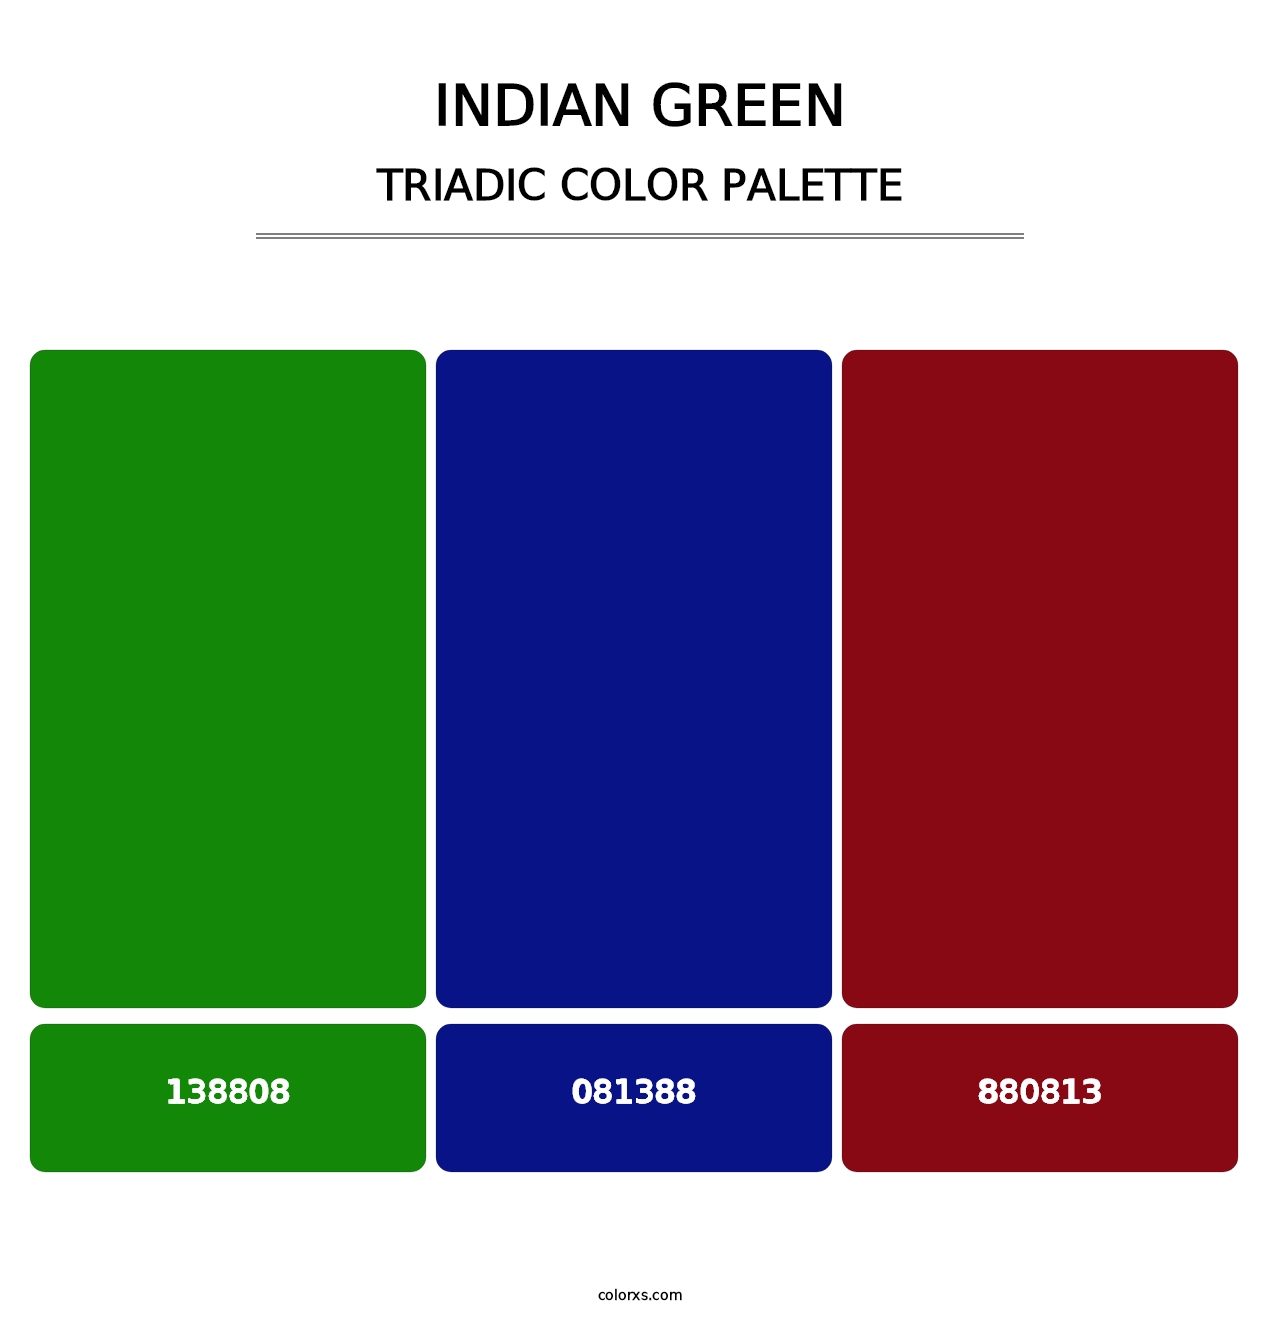 Indian Green - Triadic Color Palette